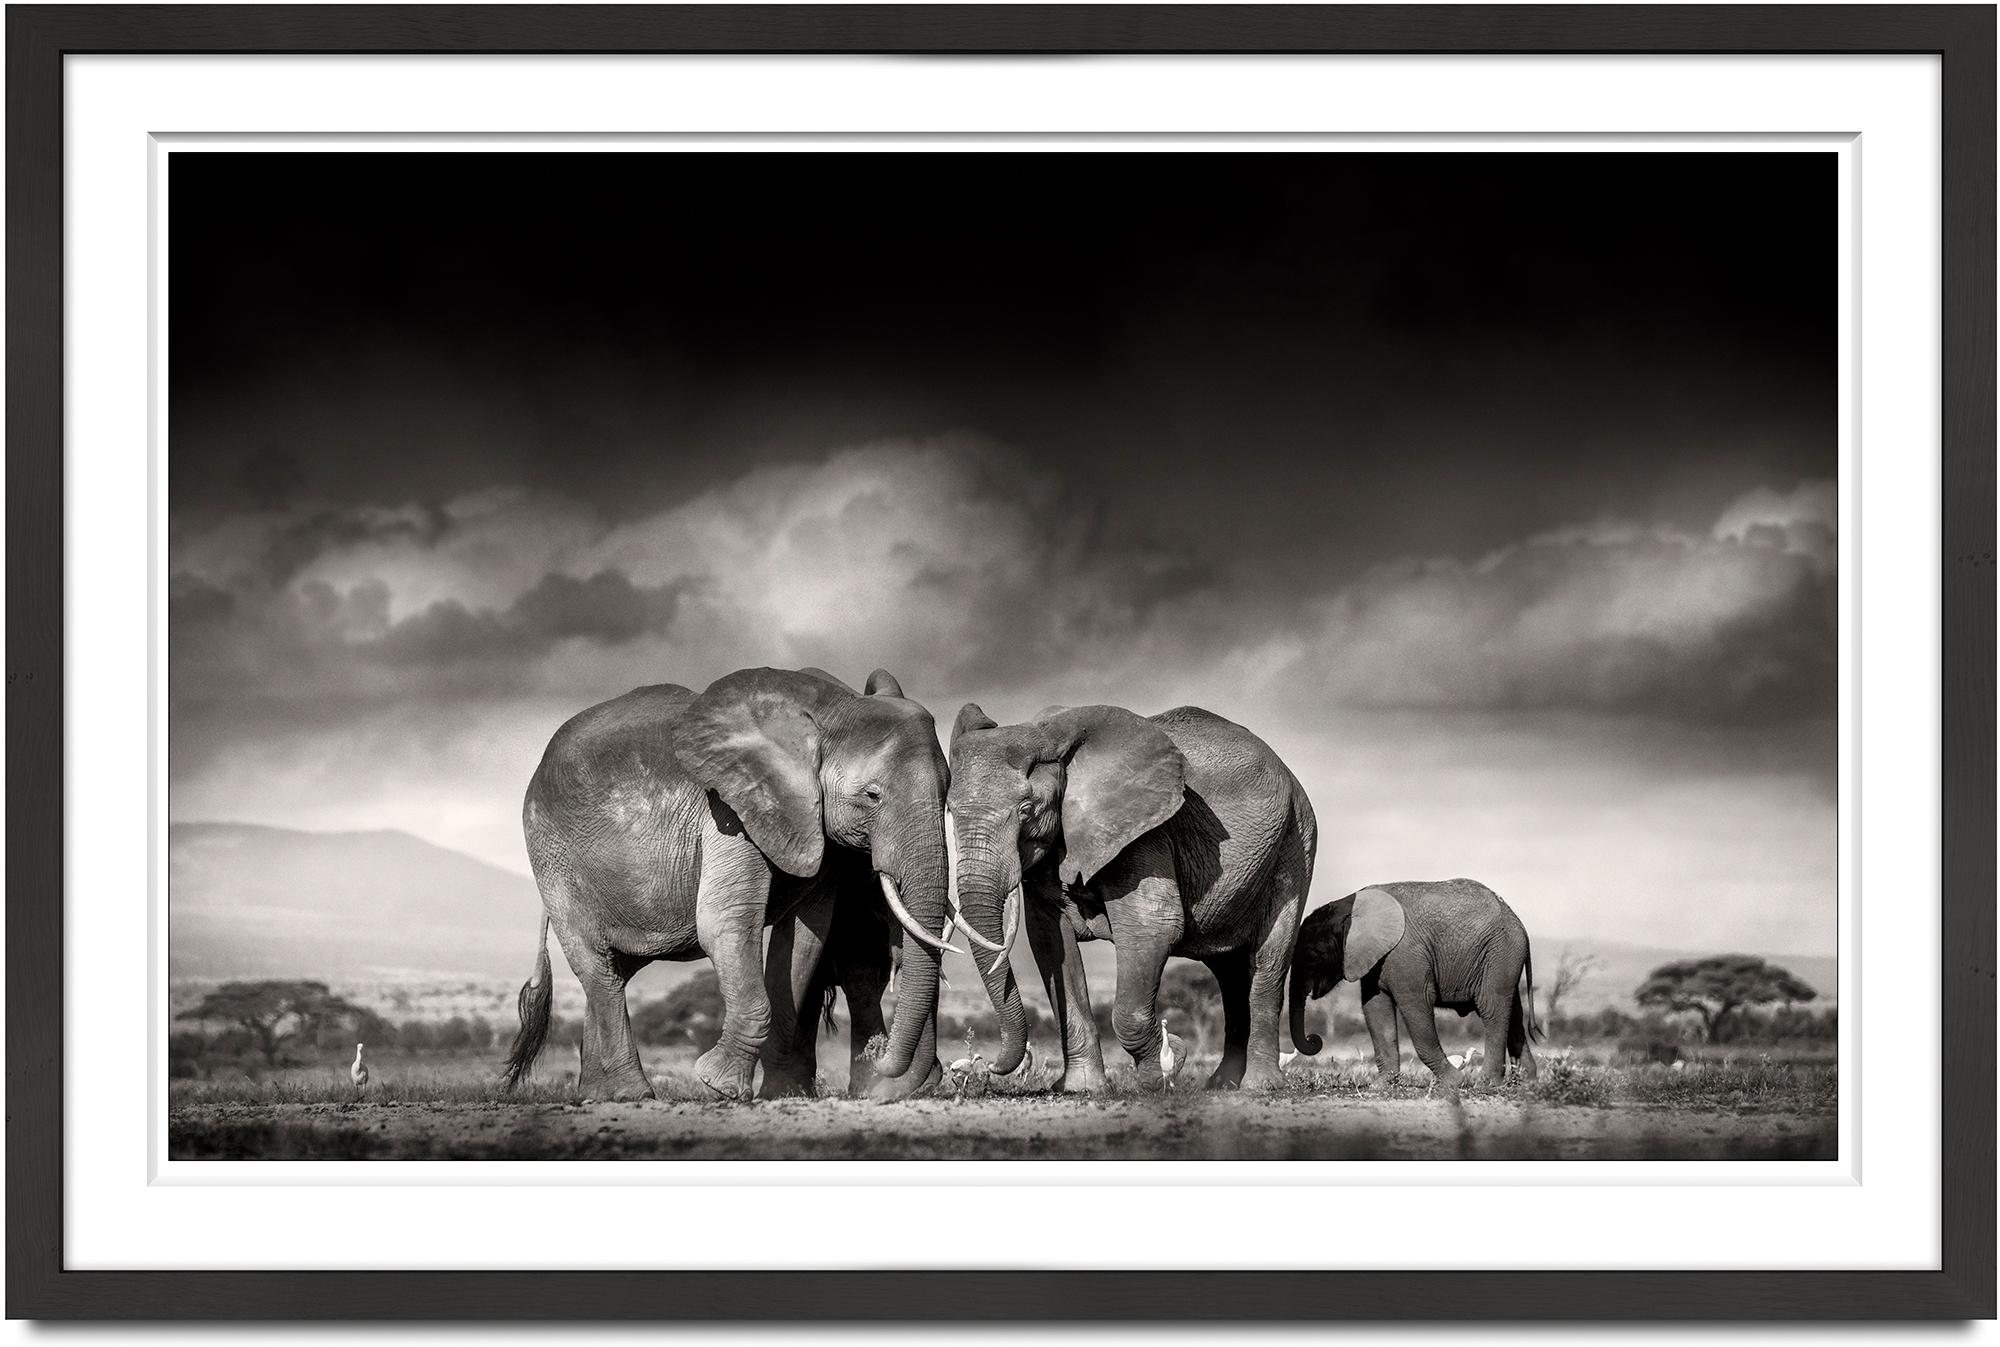 Searching for salt, animal, wildlife, black and white photography, elephant - Photograph by Joachim Schmeisser